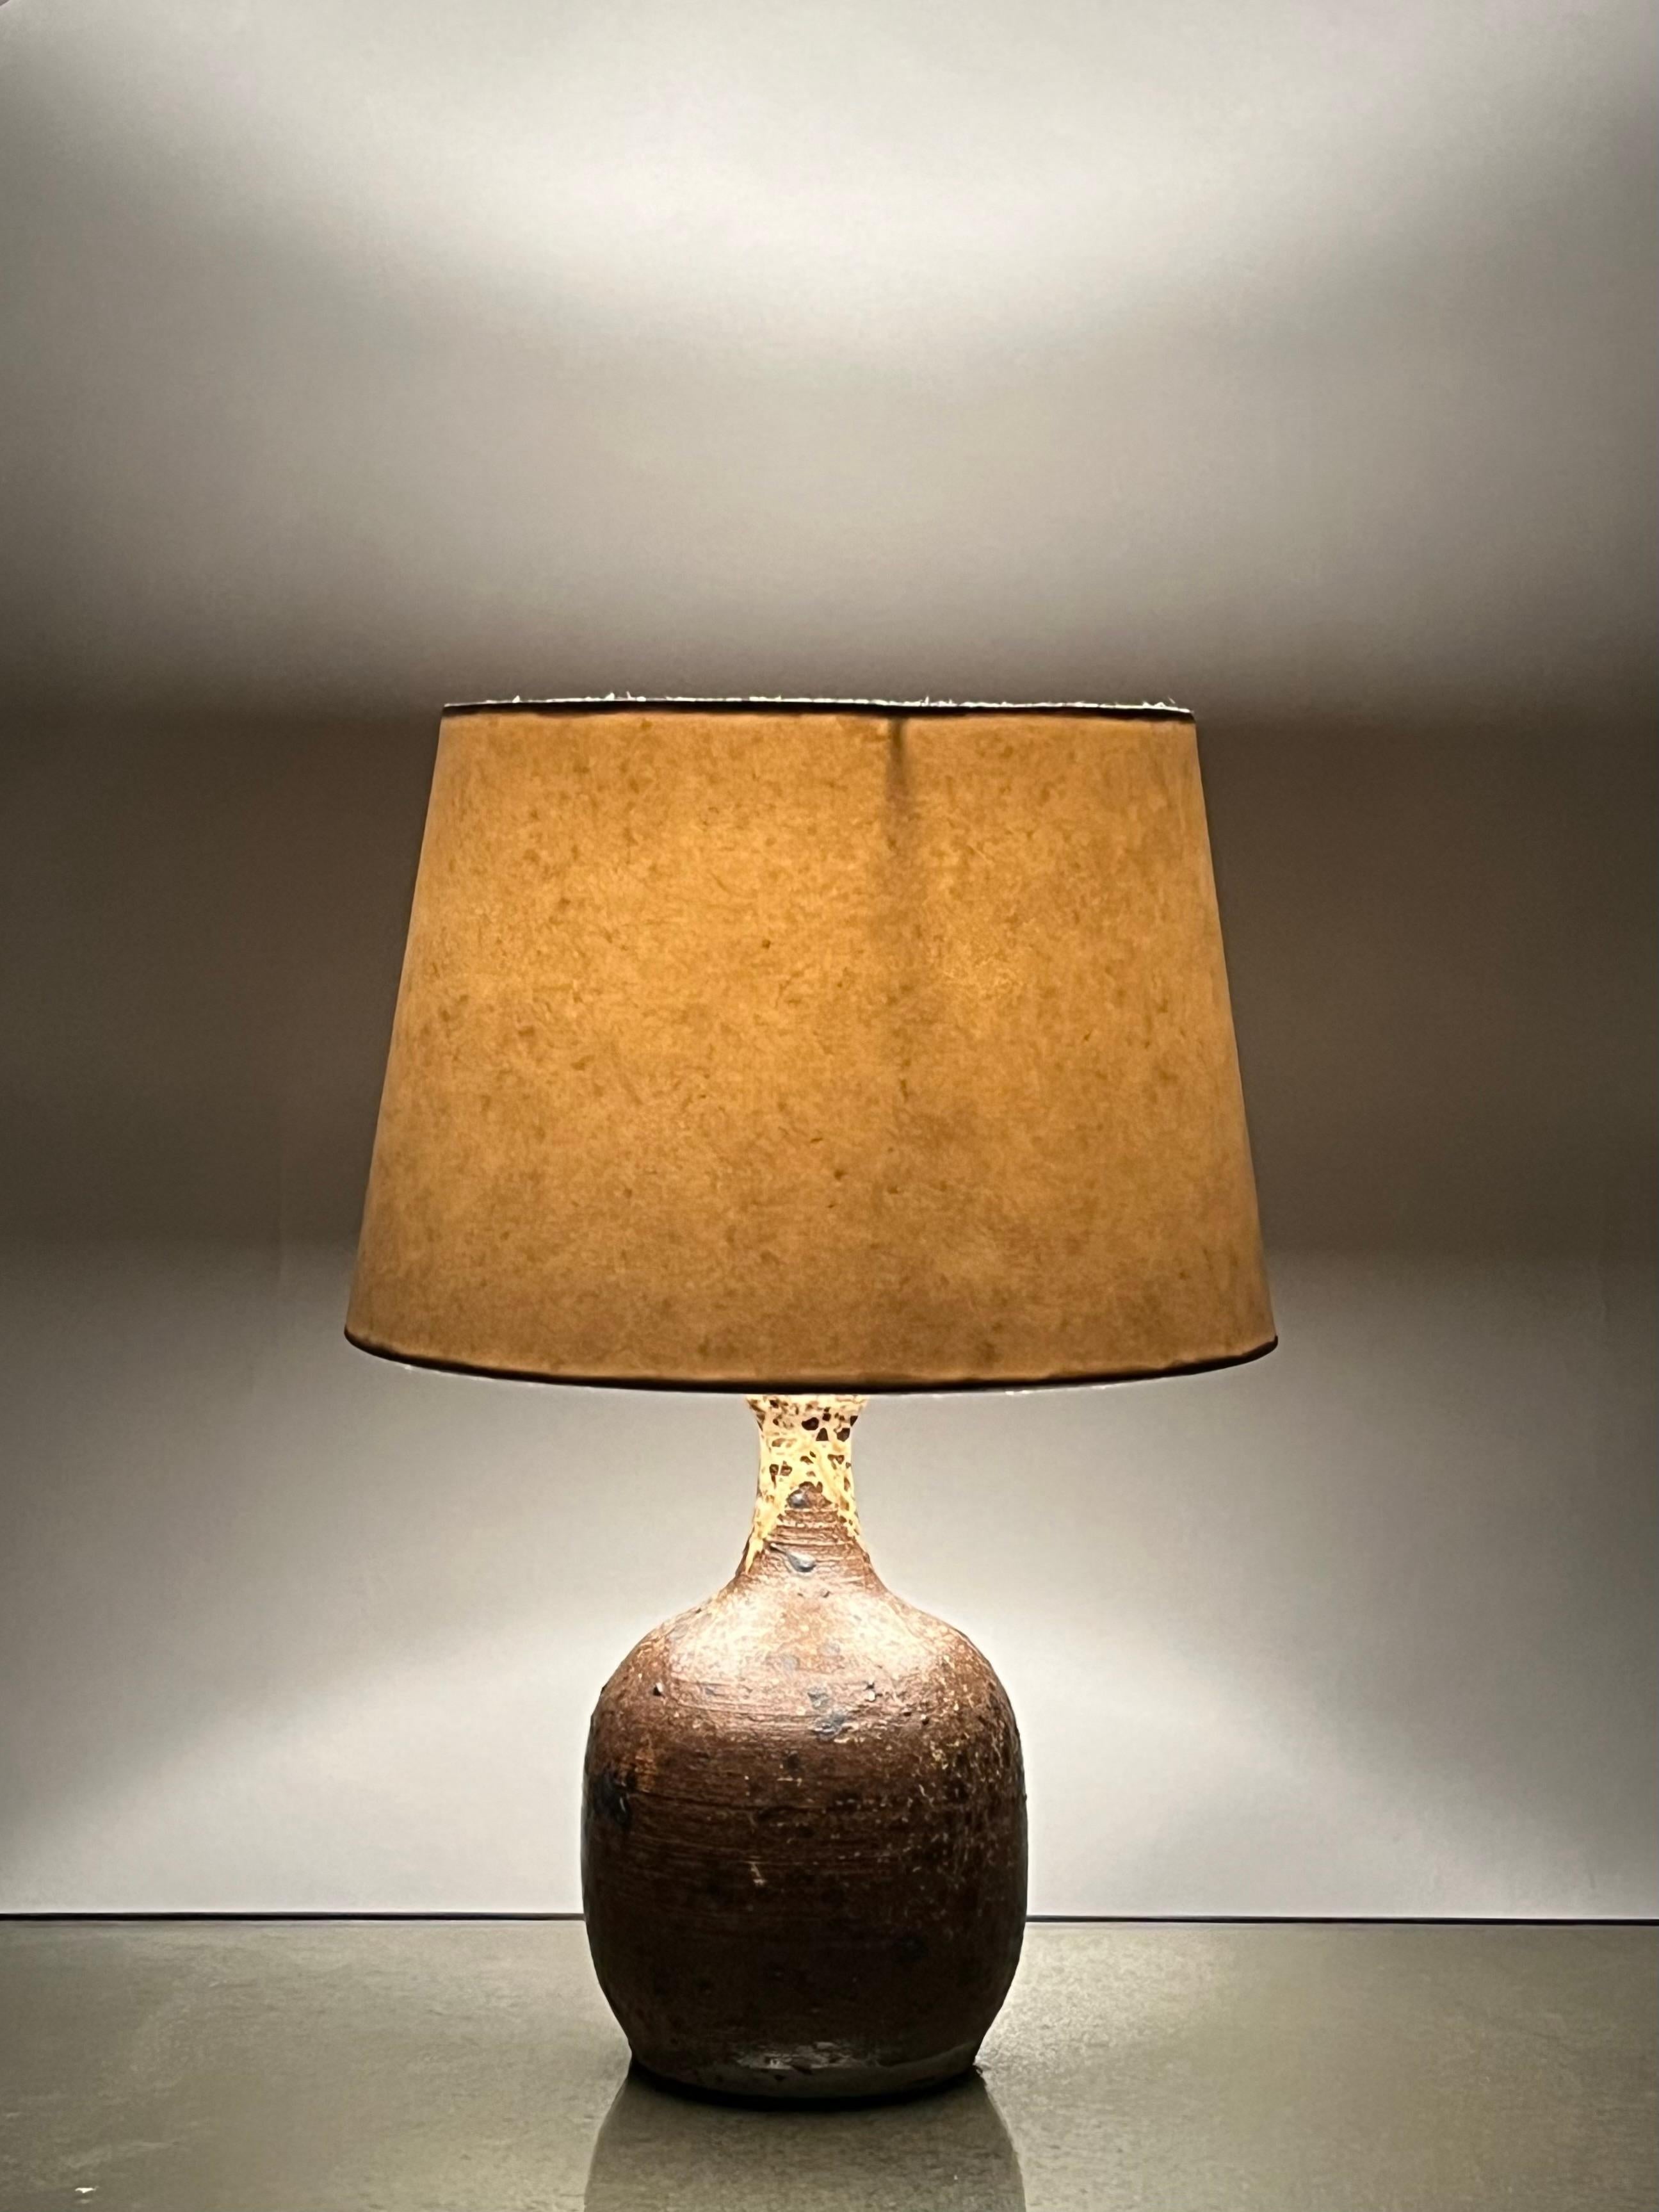 Grès Pyrité Glazed Stoneware Lamp by La Borne Pottery, France  In Excellent Condition For Sale In Los Angeles, CA